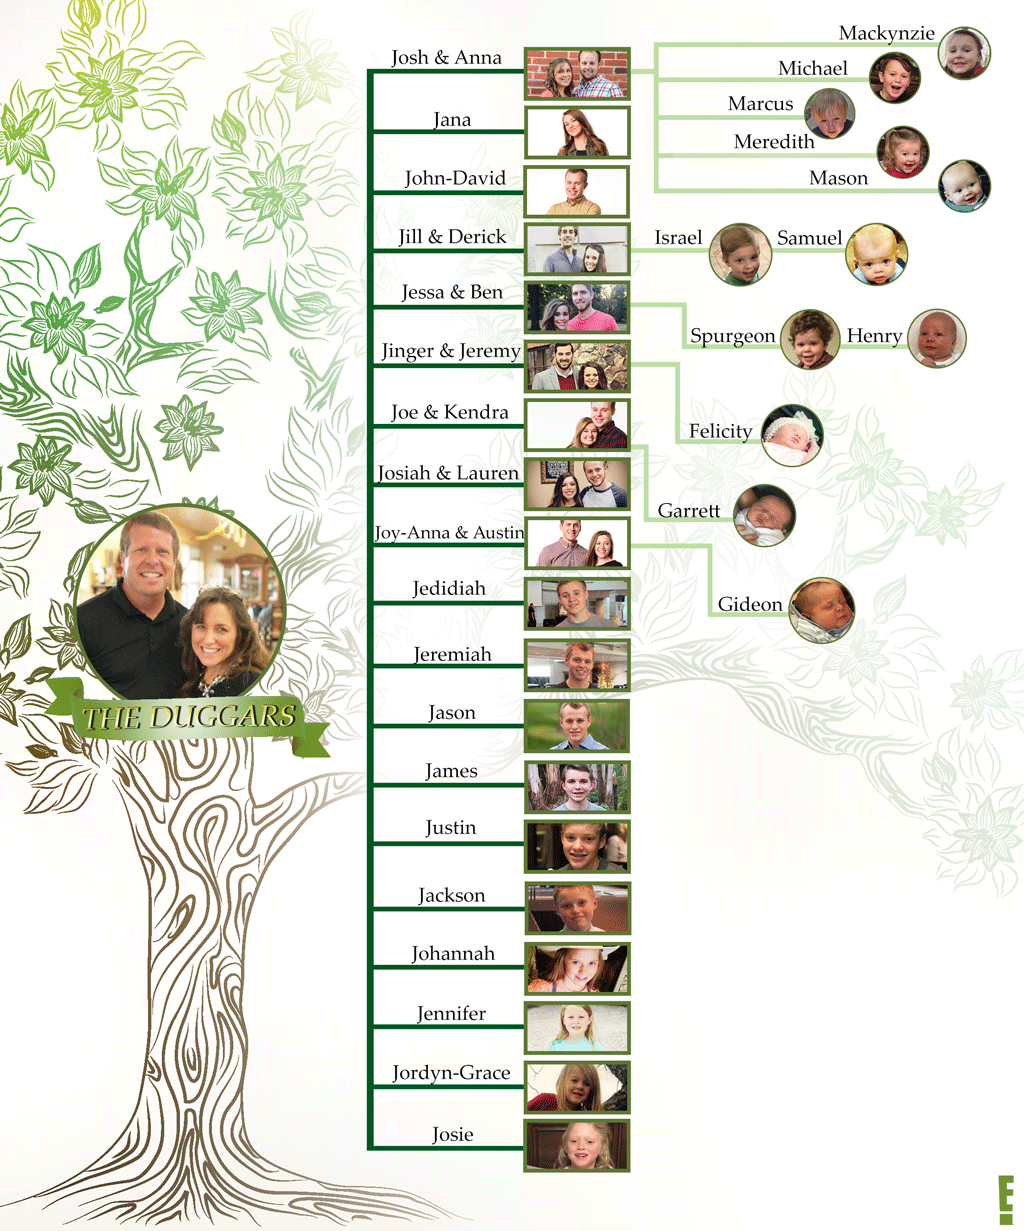 The Duggar Family  Tree  A Complete Breakdown of the Ever 